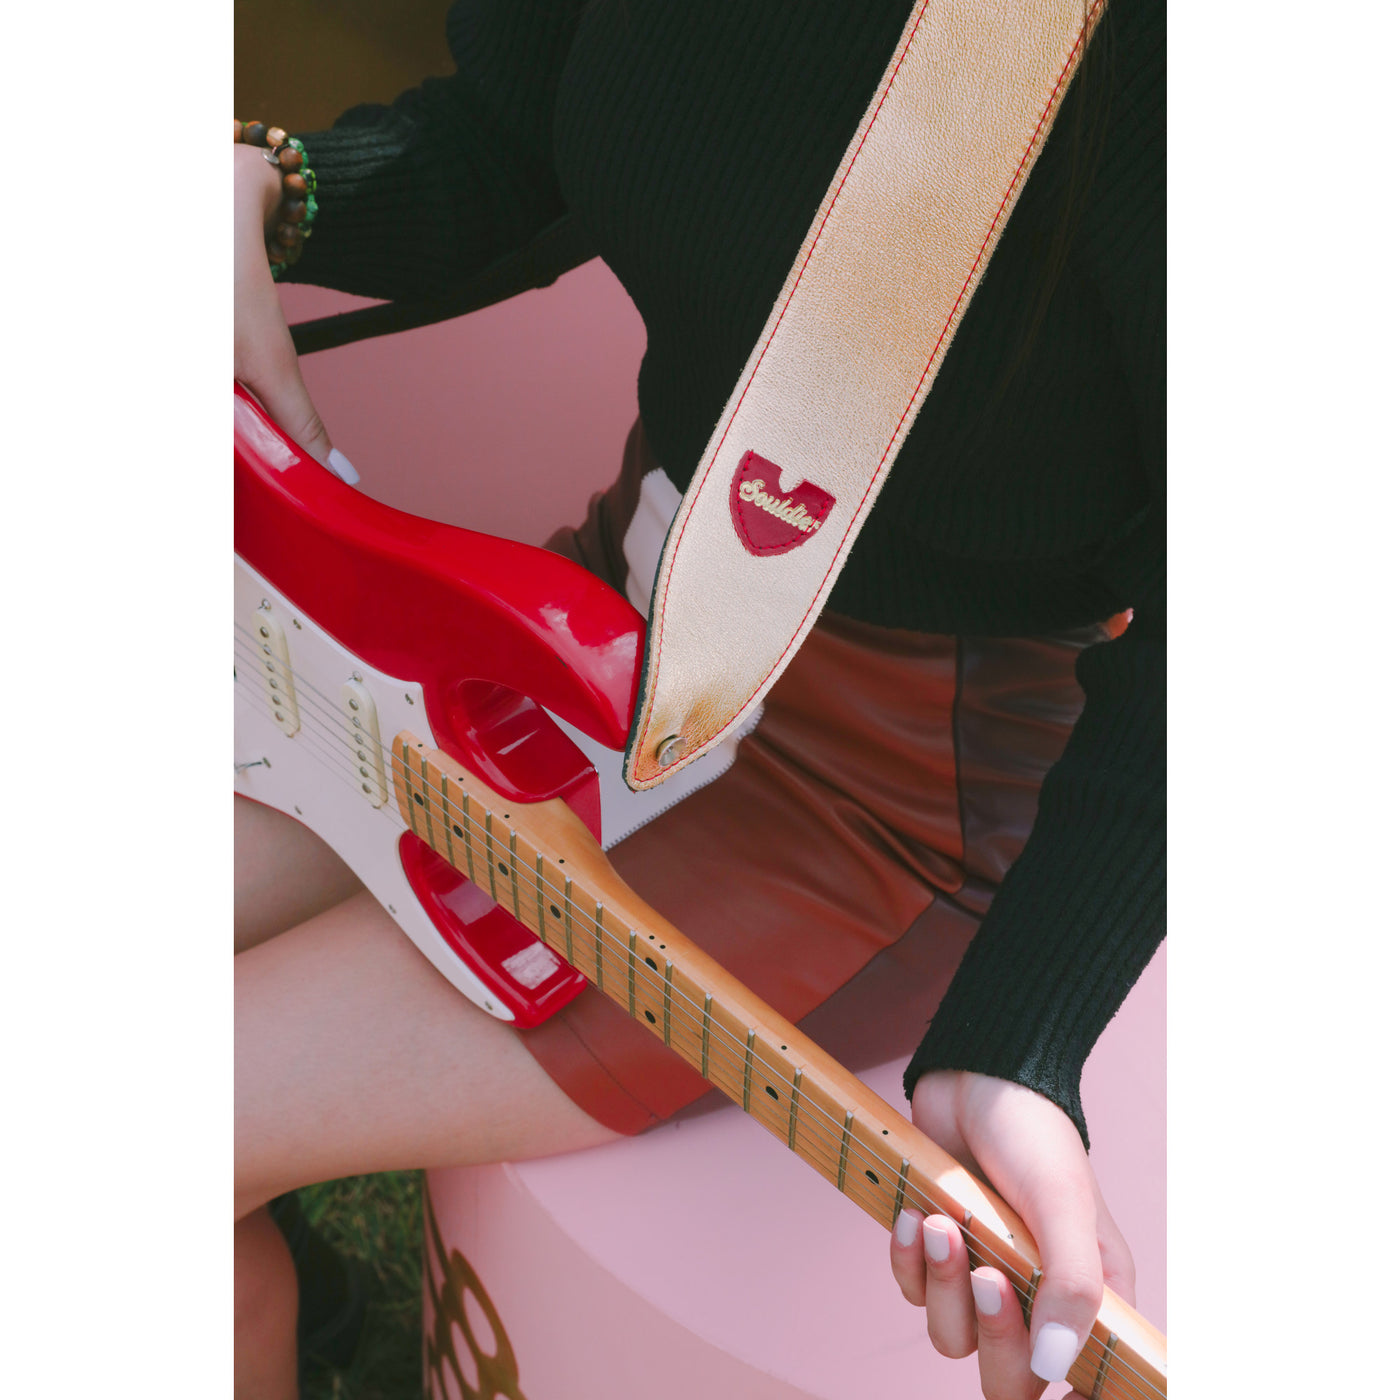 Souldier GS1067WH02WH - Handmade Seatbelt Guitar Strap for Bass, Electric or Acoustic Guitar, 2 Inches Wide and Adjustable Length from 30" to 63"  Made in the USA, Tulip, Cream